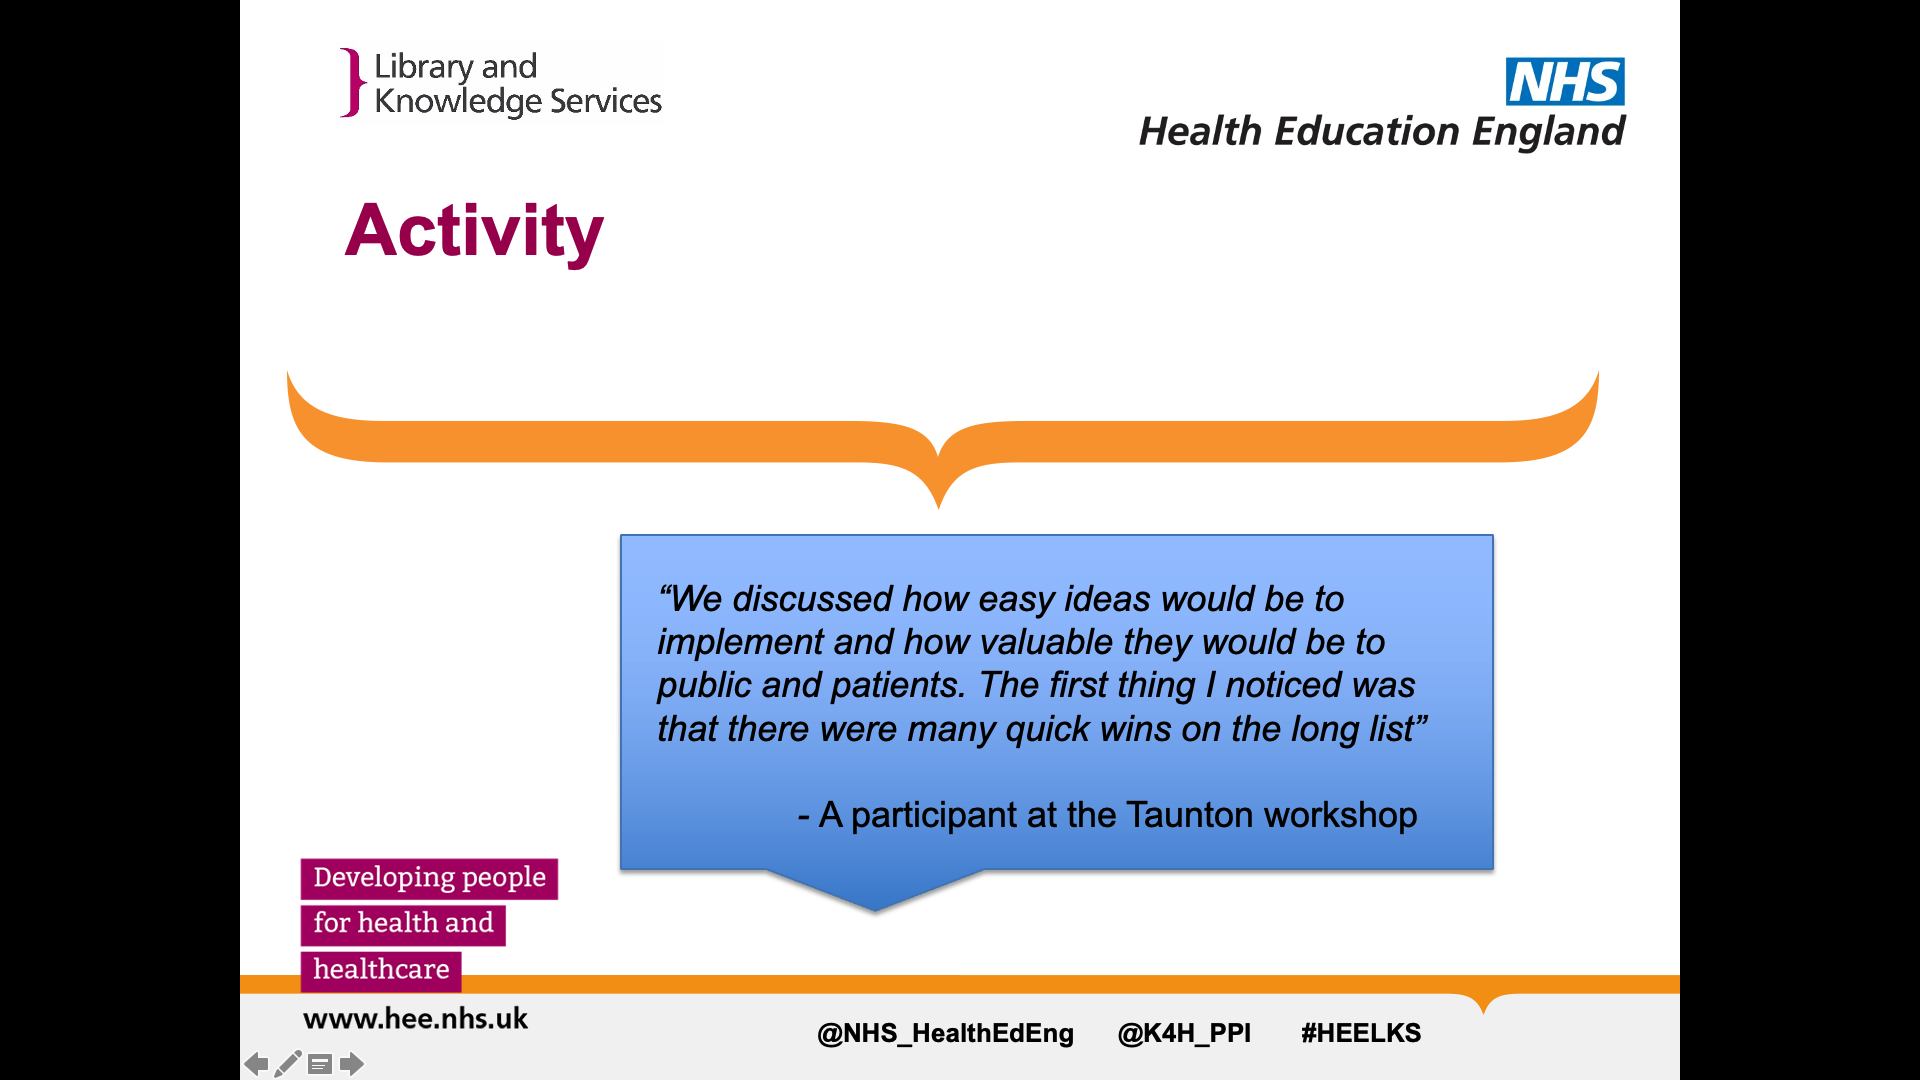 Title: Activity. Text on page: Quote from participant at Taunton workshop - 